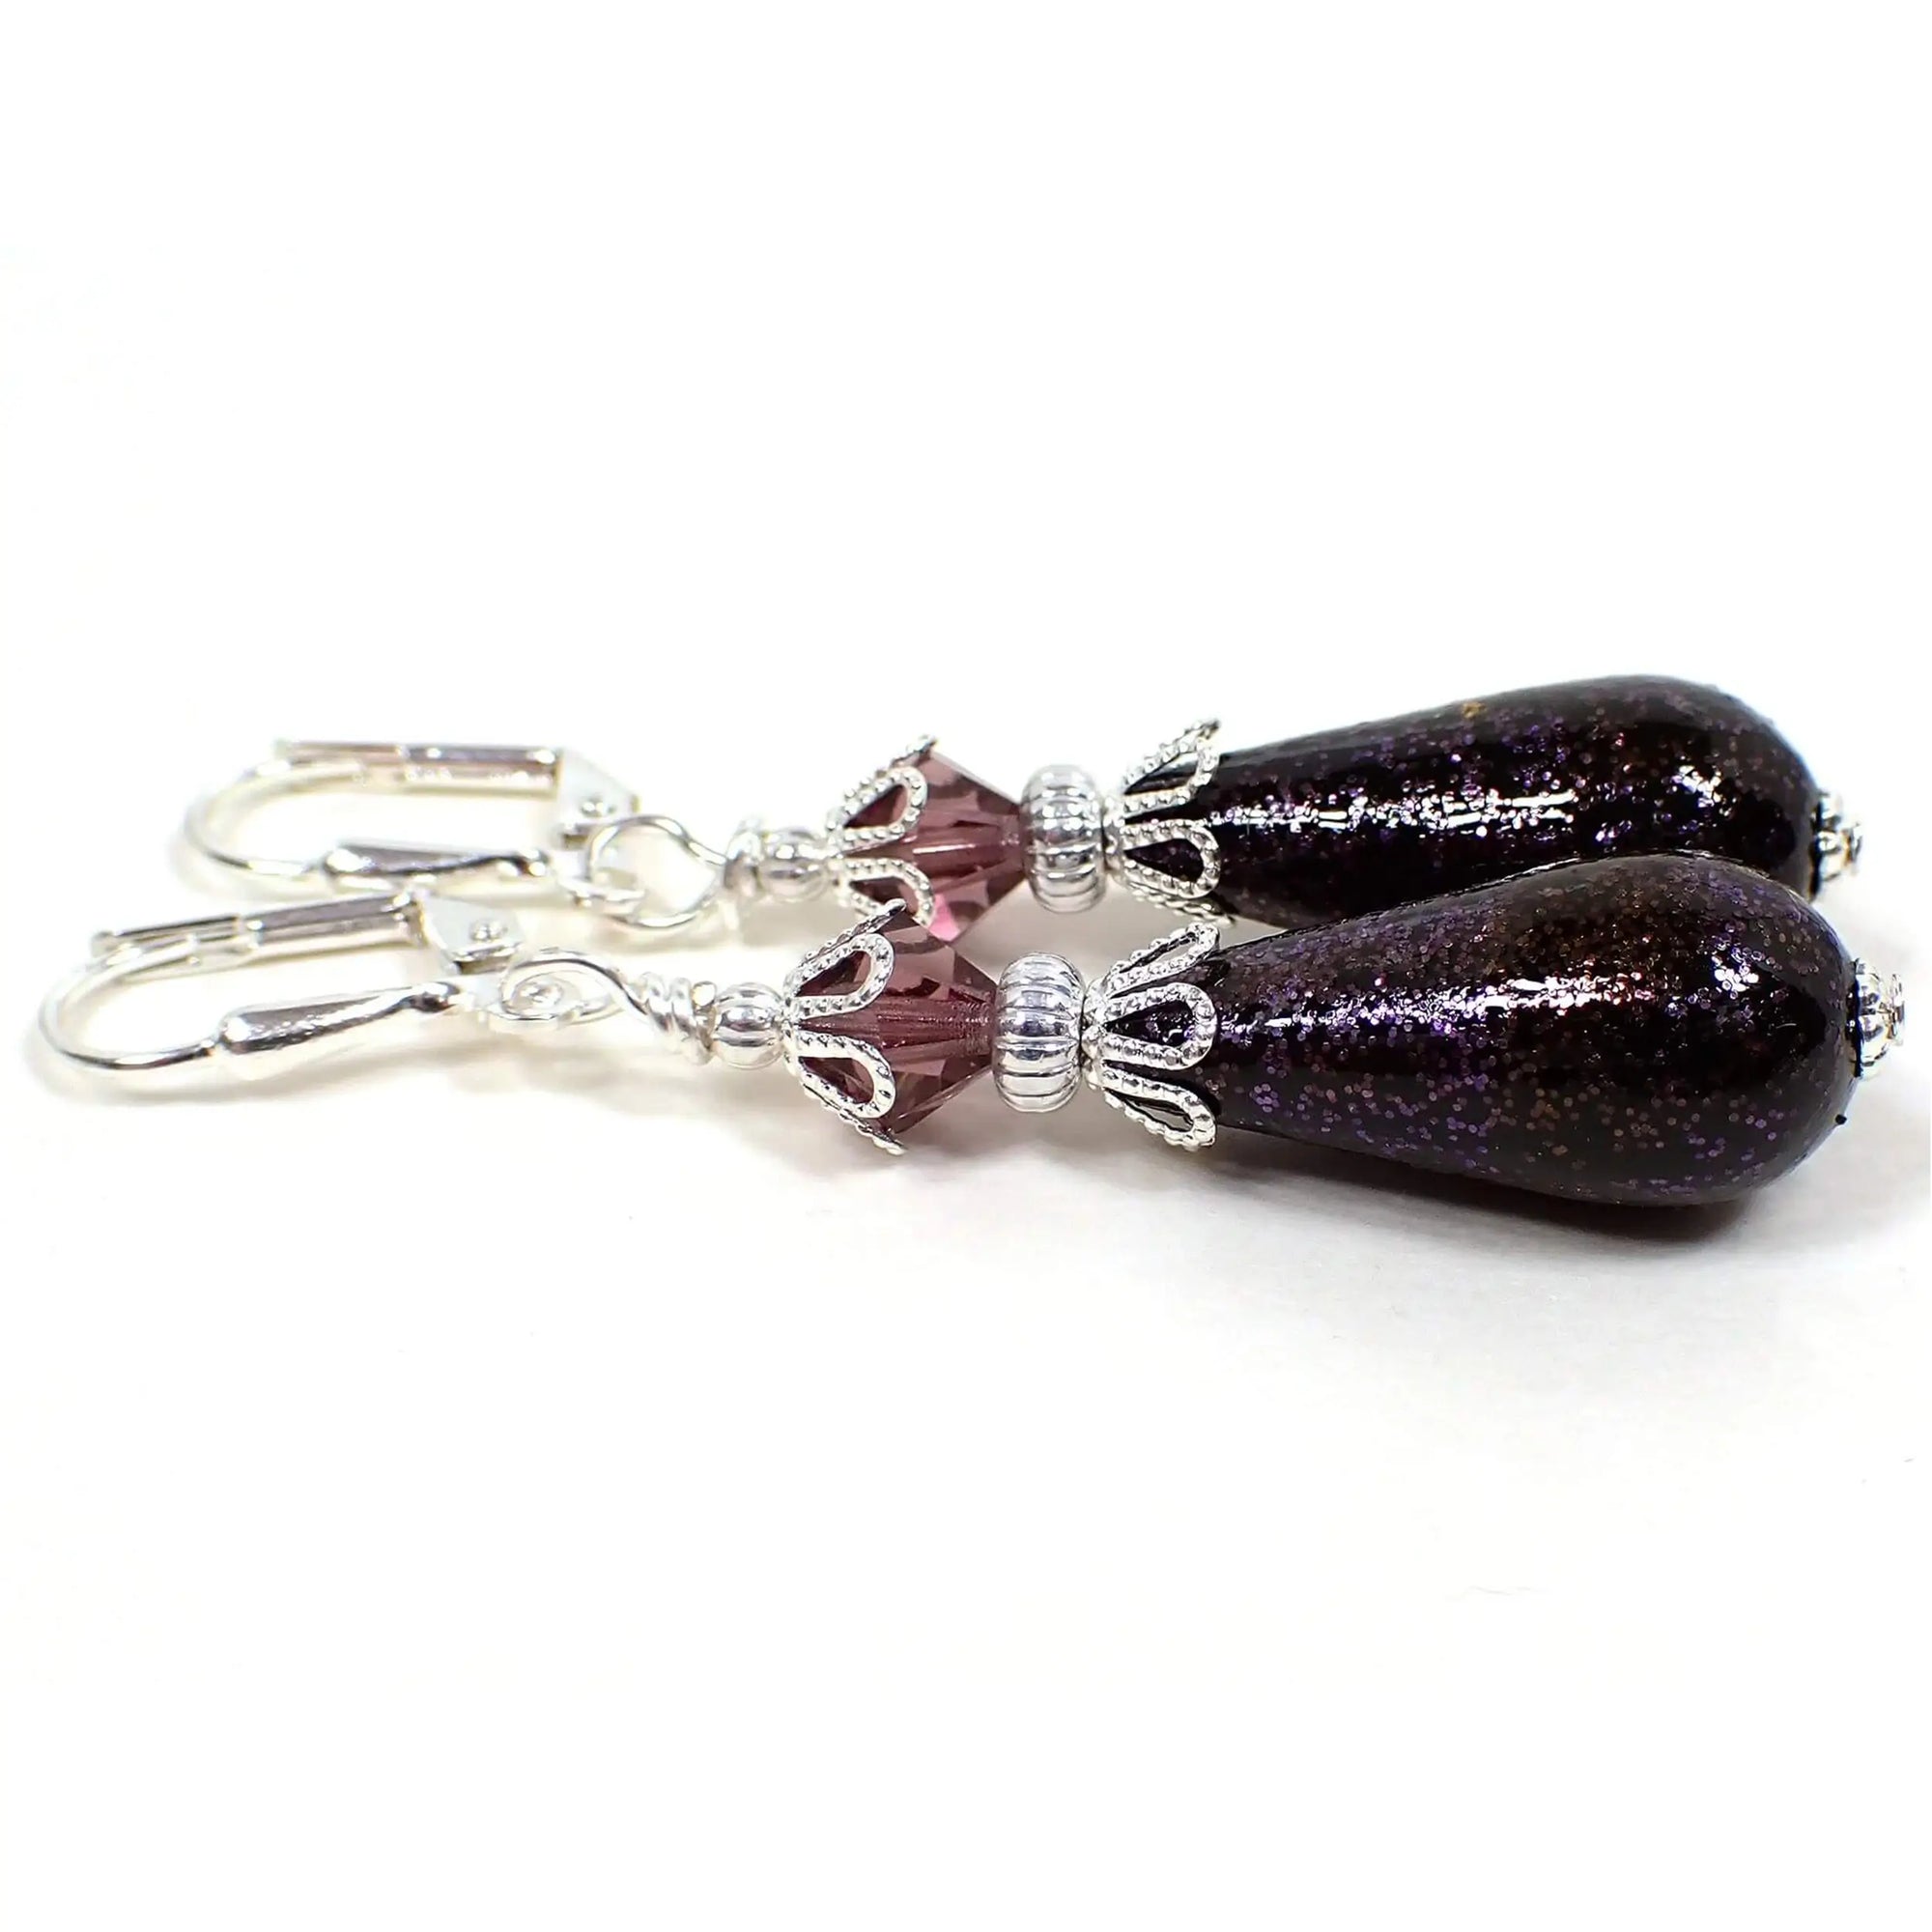 Side view of the handmade teardrop earrings with vintage German beads. The metal is silver plated in color. There are purple faceted glass crystal beads at the top. The bottom acrylic beads are teardrop shaped and are black with purple glitter on the outside.